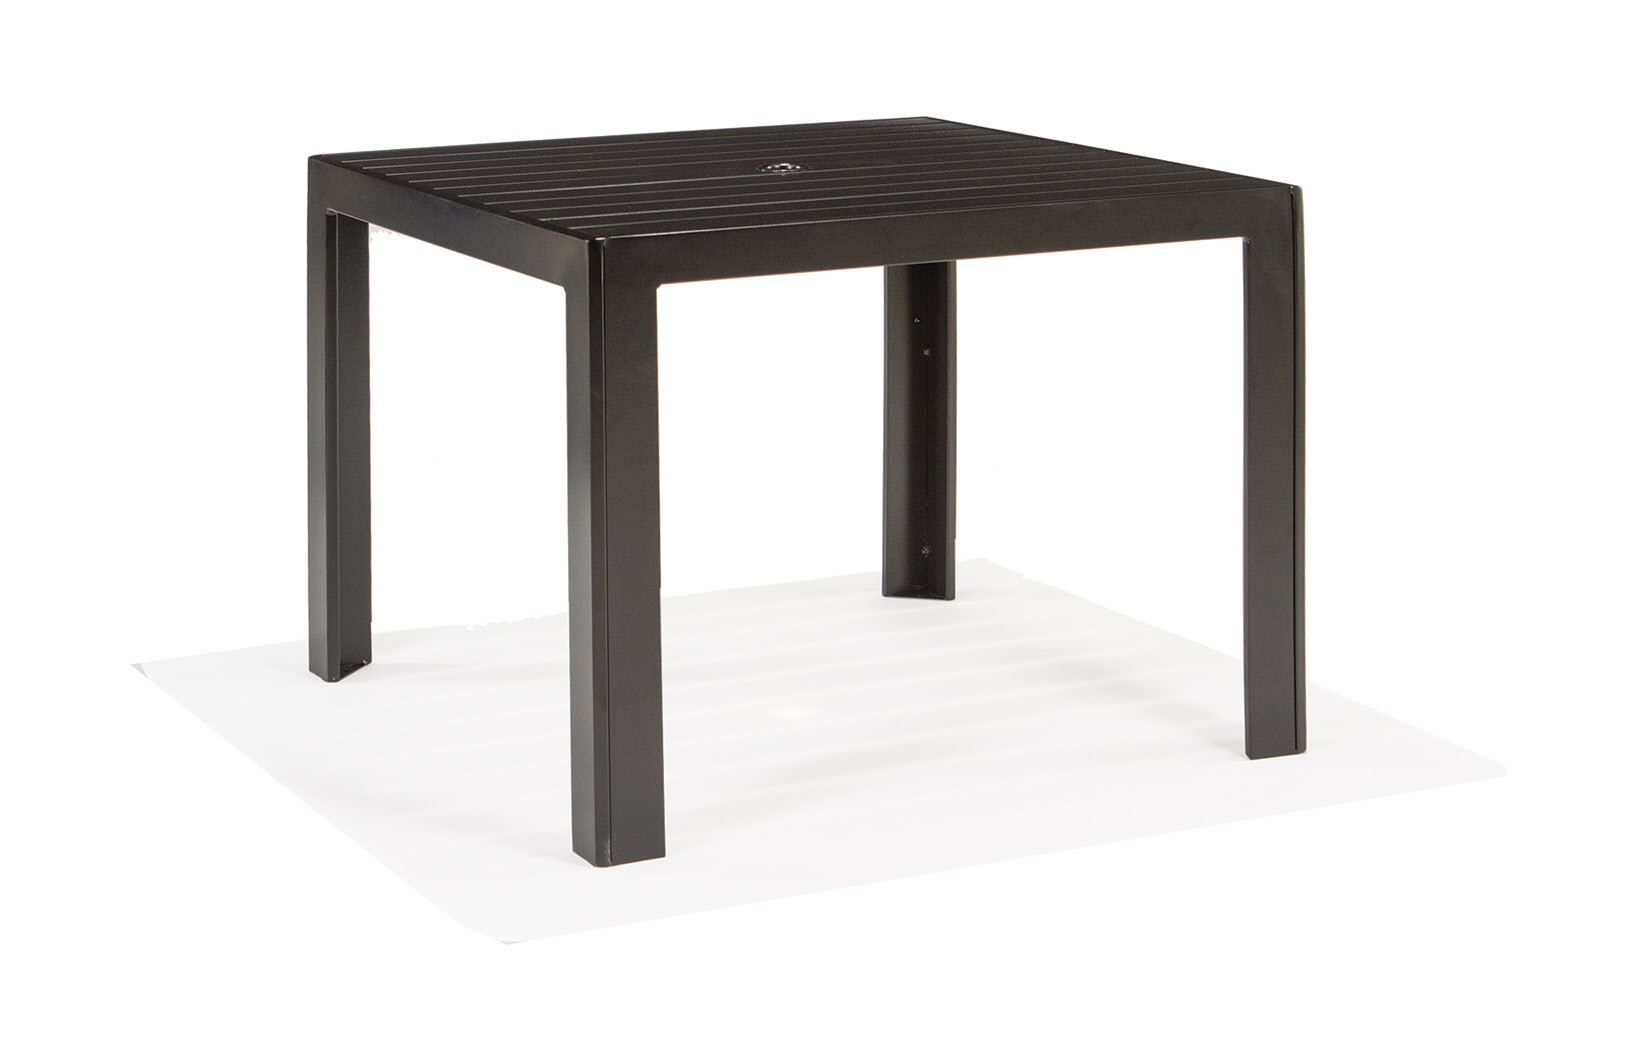 Meza Slat Collection Fully Welded Aluminum Dining Tables